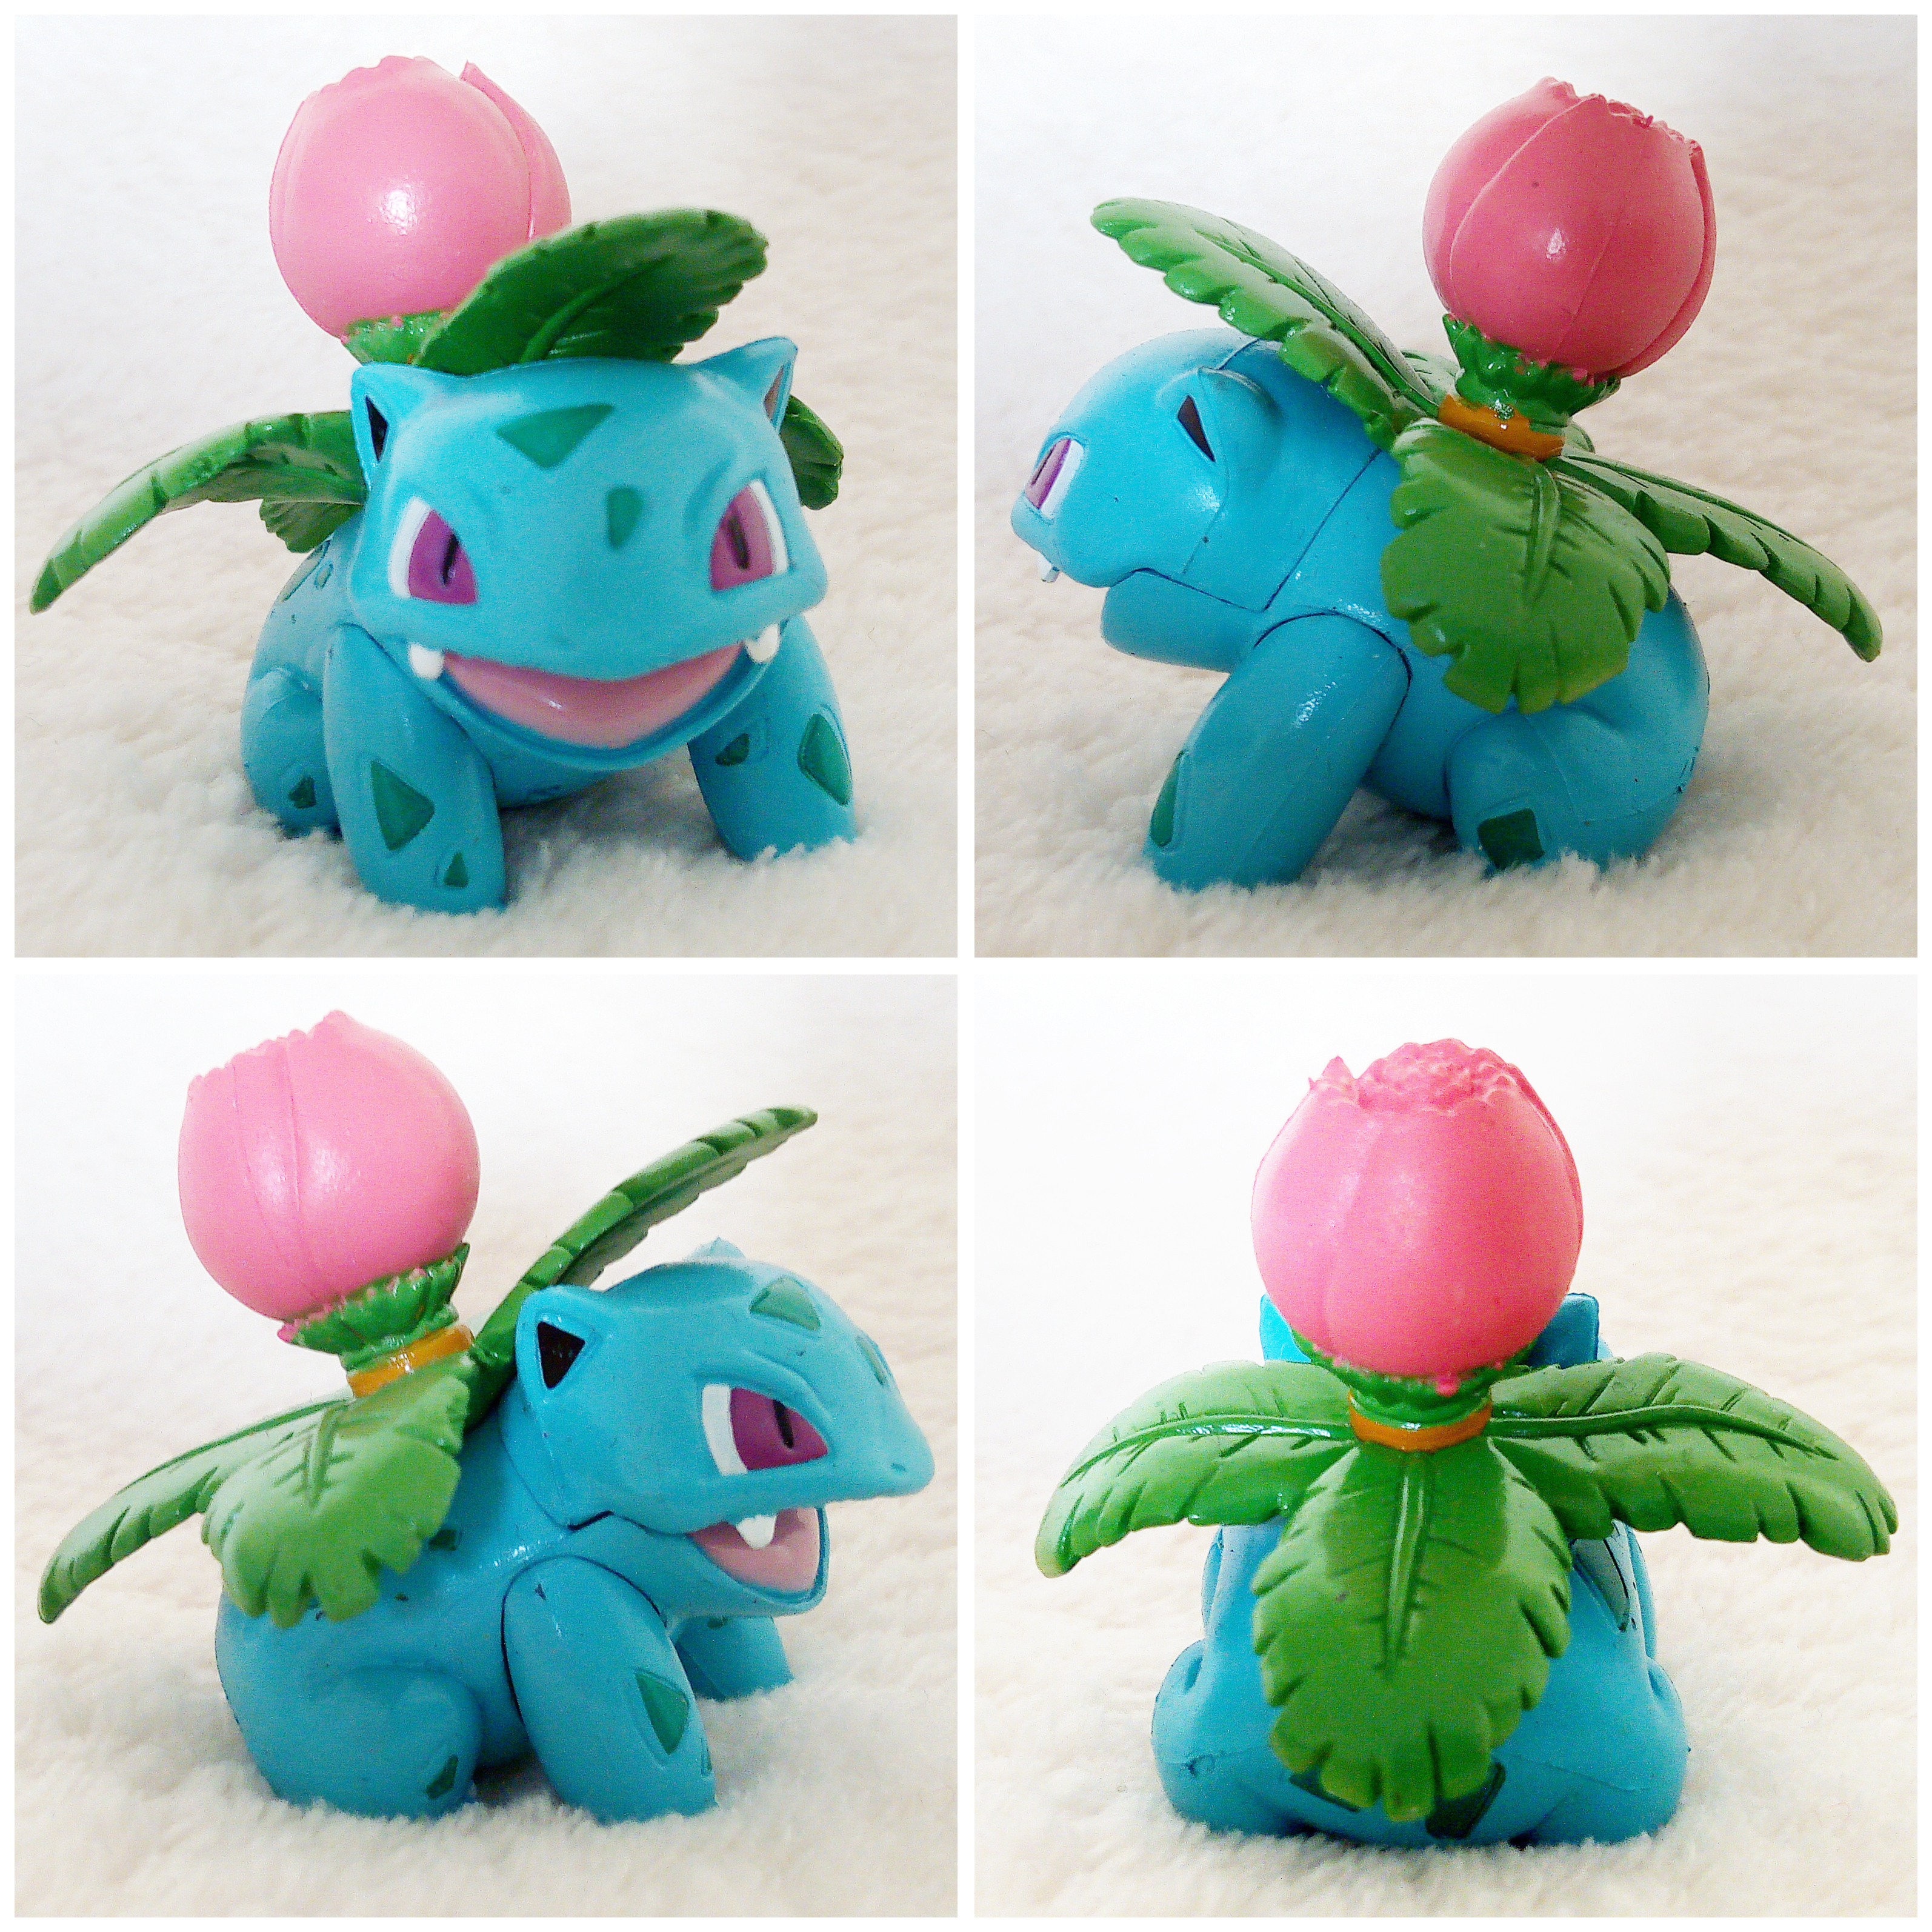 A front, left, right and back view of the Pokémon Tomy figure Ivysaur alternative